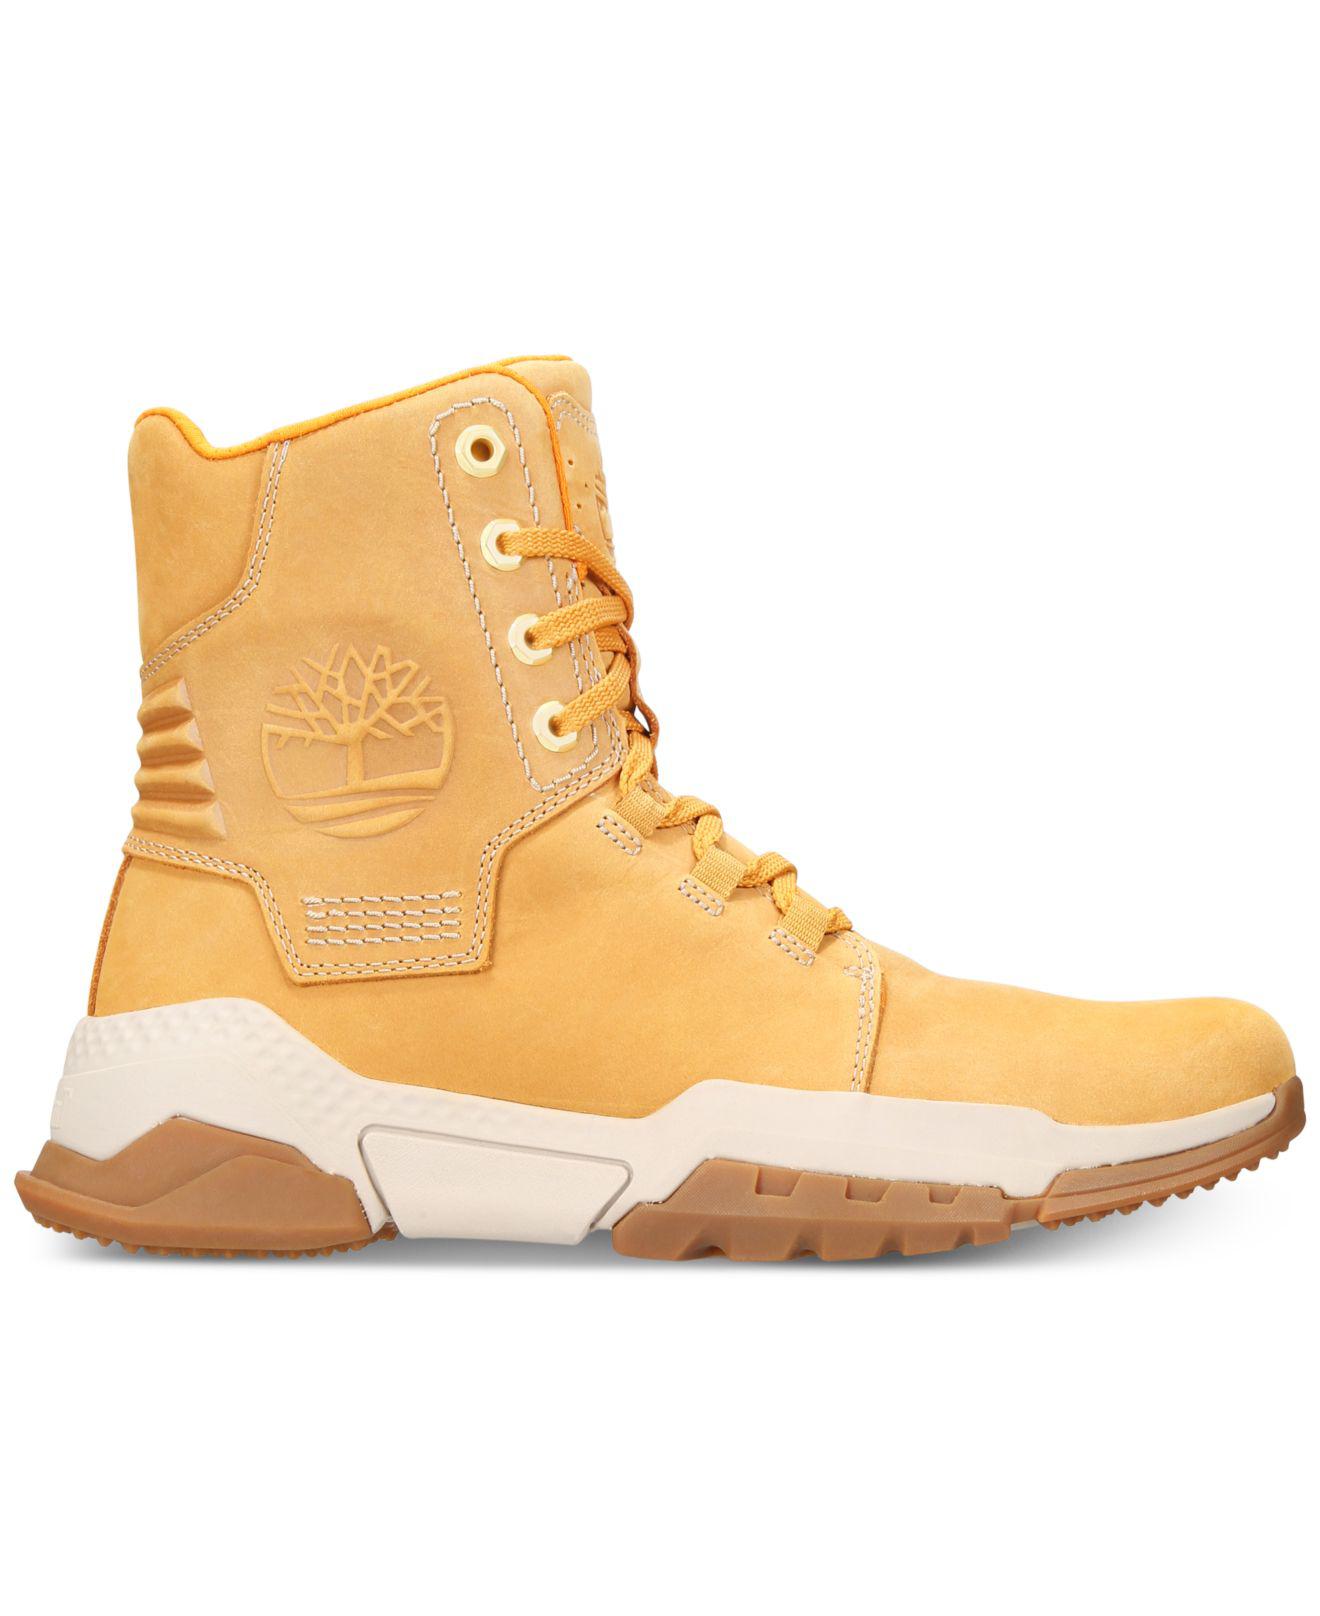 Timberland City Force Leather Boots for Men - Lyst